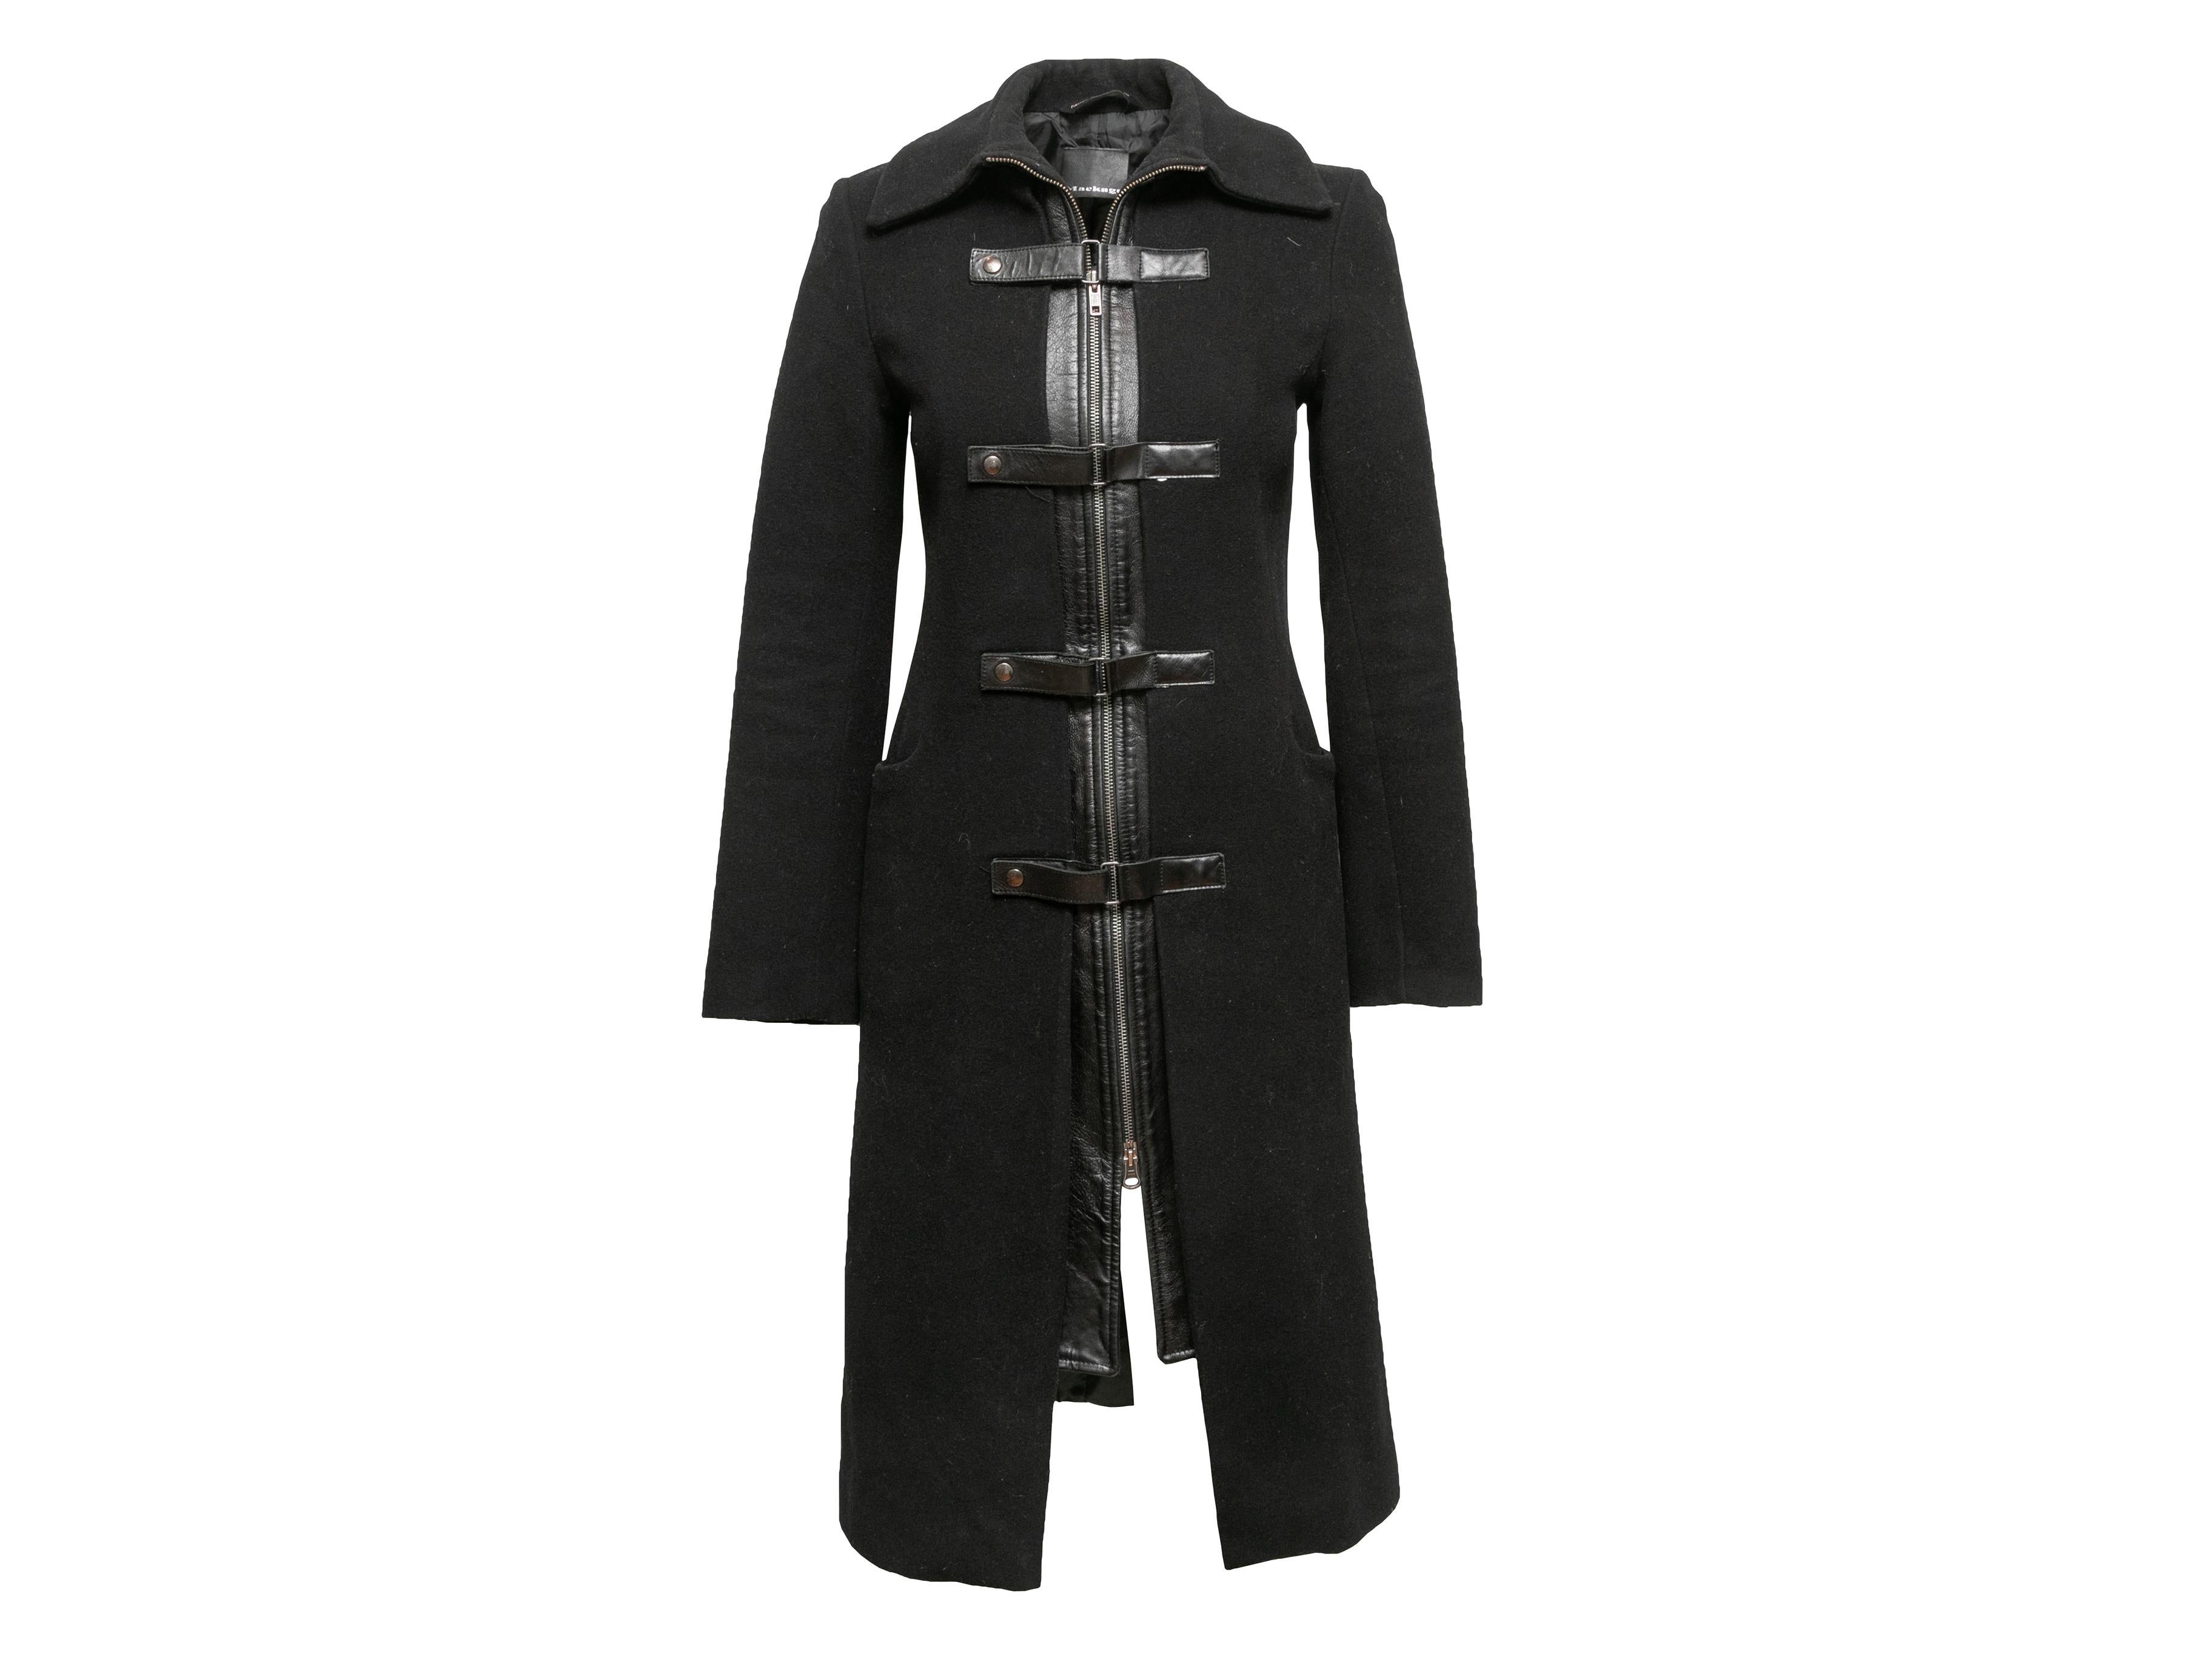 Black wool and leather-trimmed long coat by Mackage. Pointed collar. Dual hip pockets. Buckle embellishments at front. Zip closure at center front. 34